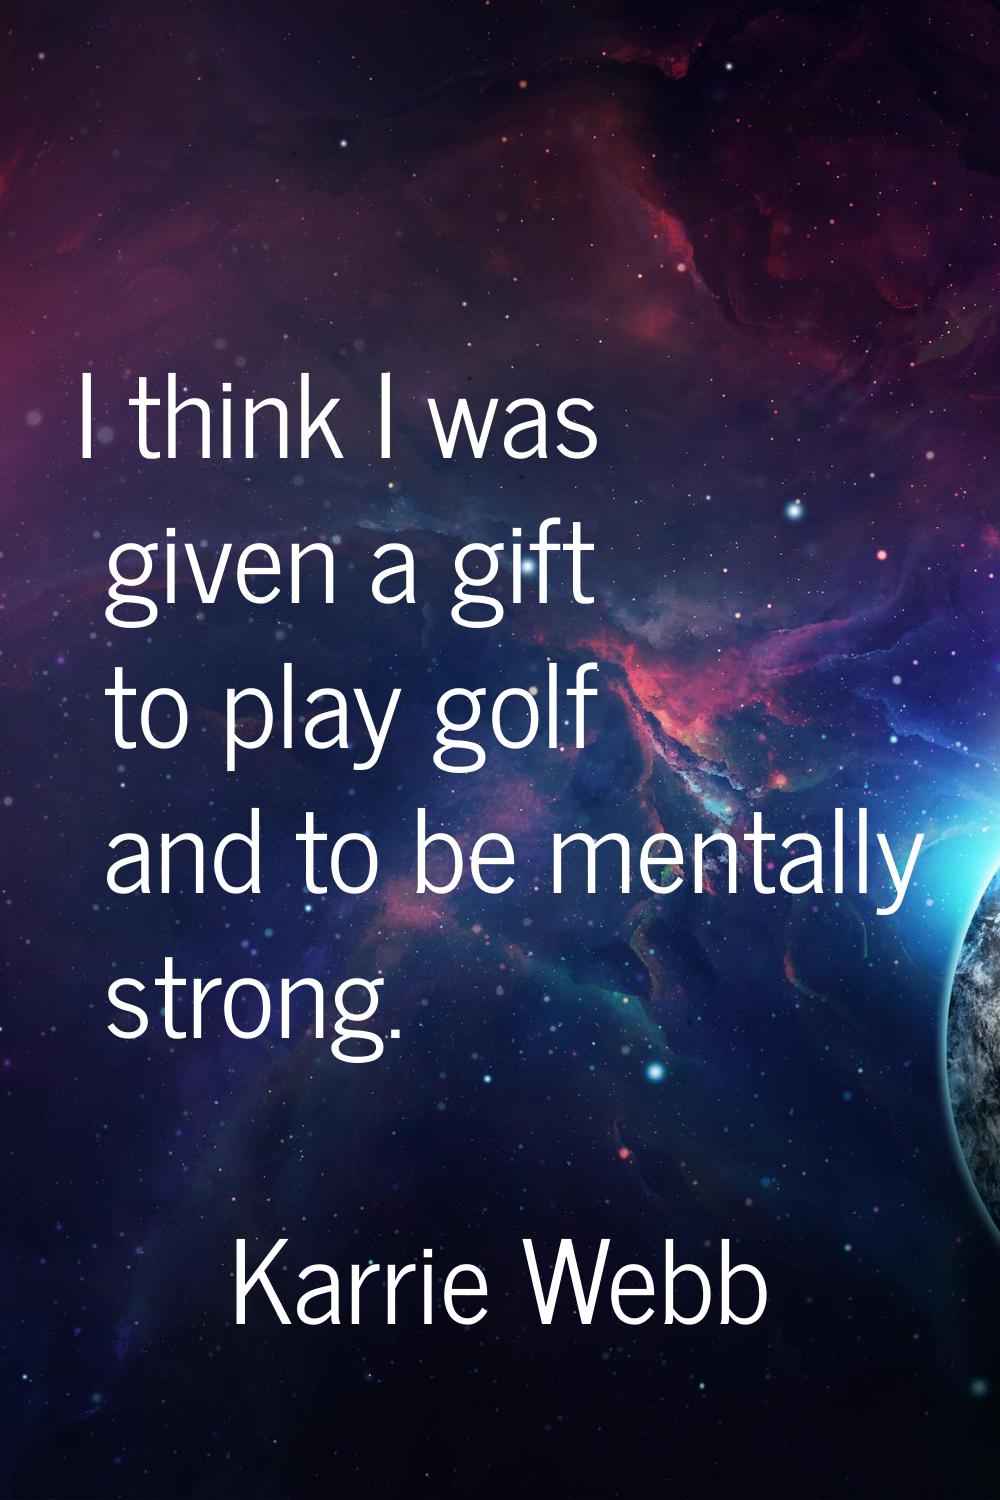 I think I was given a gift to play golf and to be mentally strong.